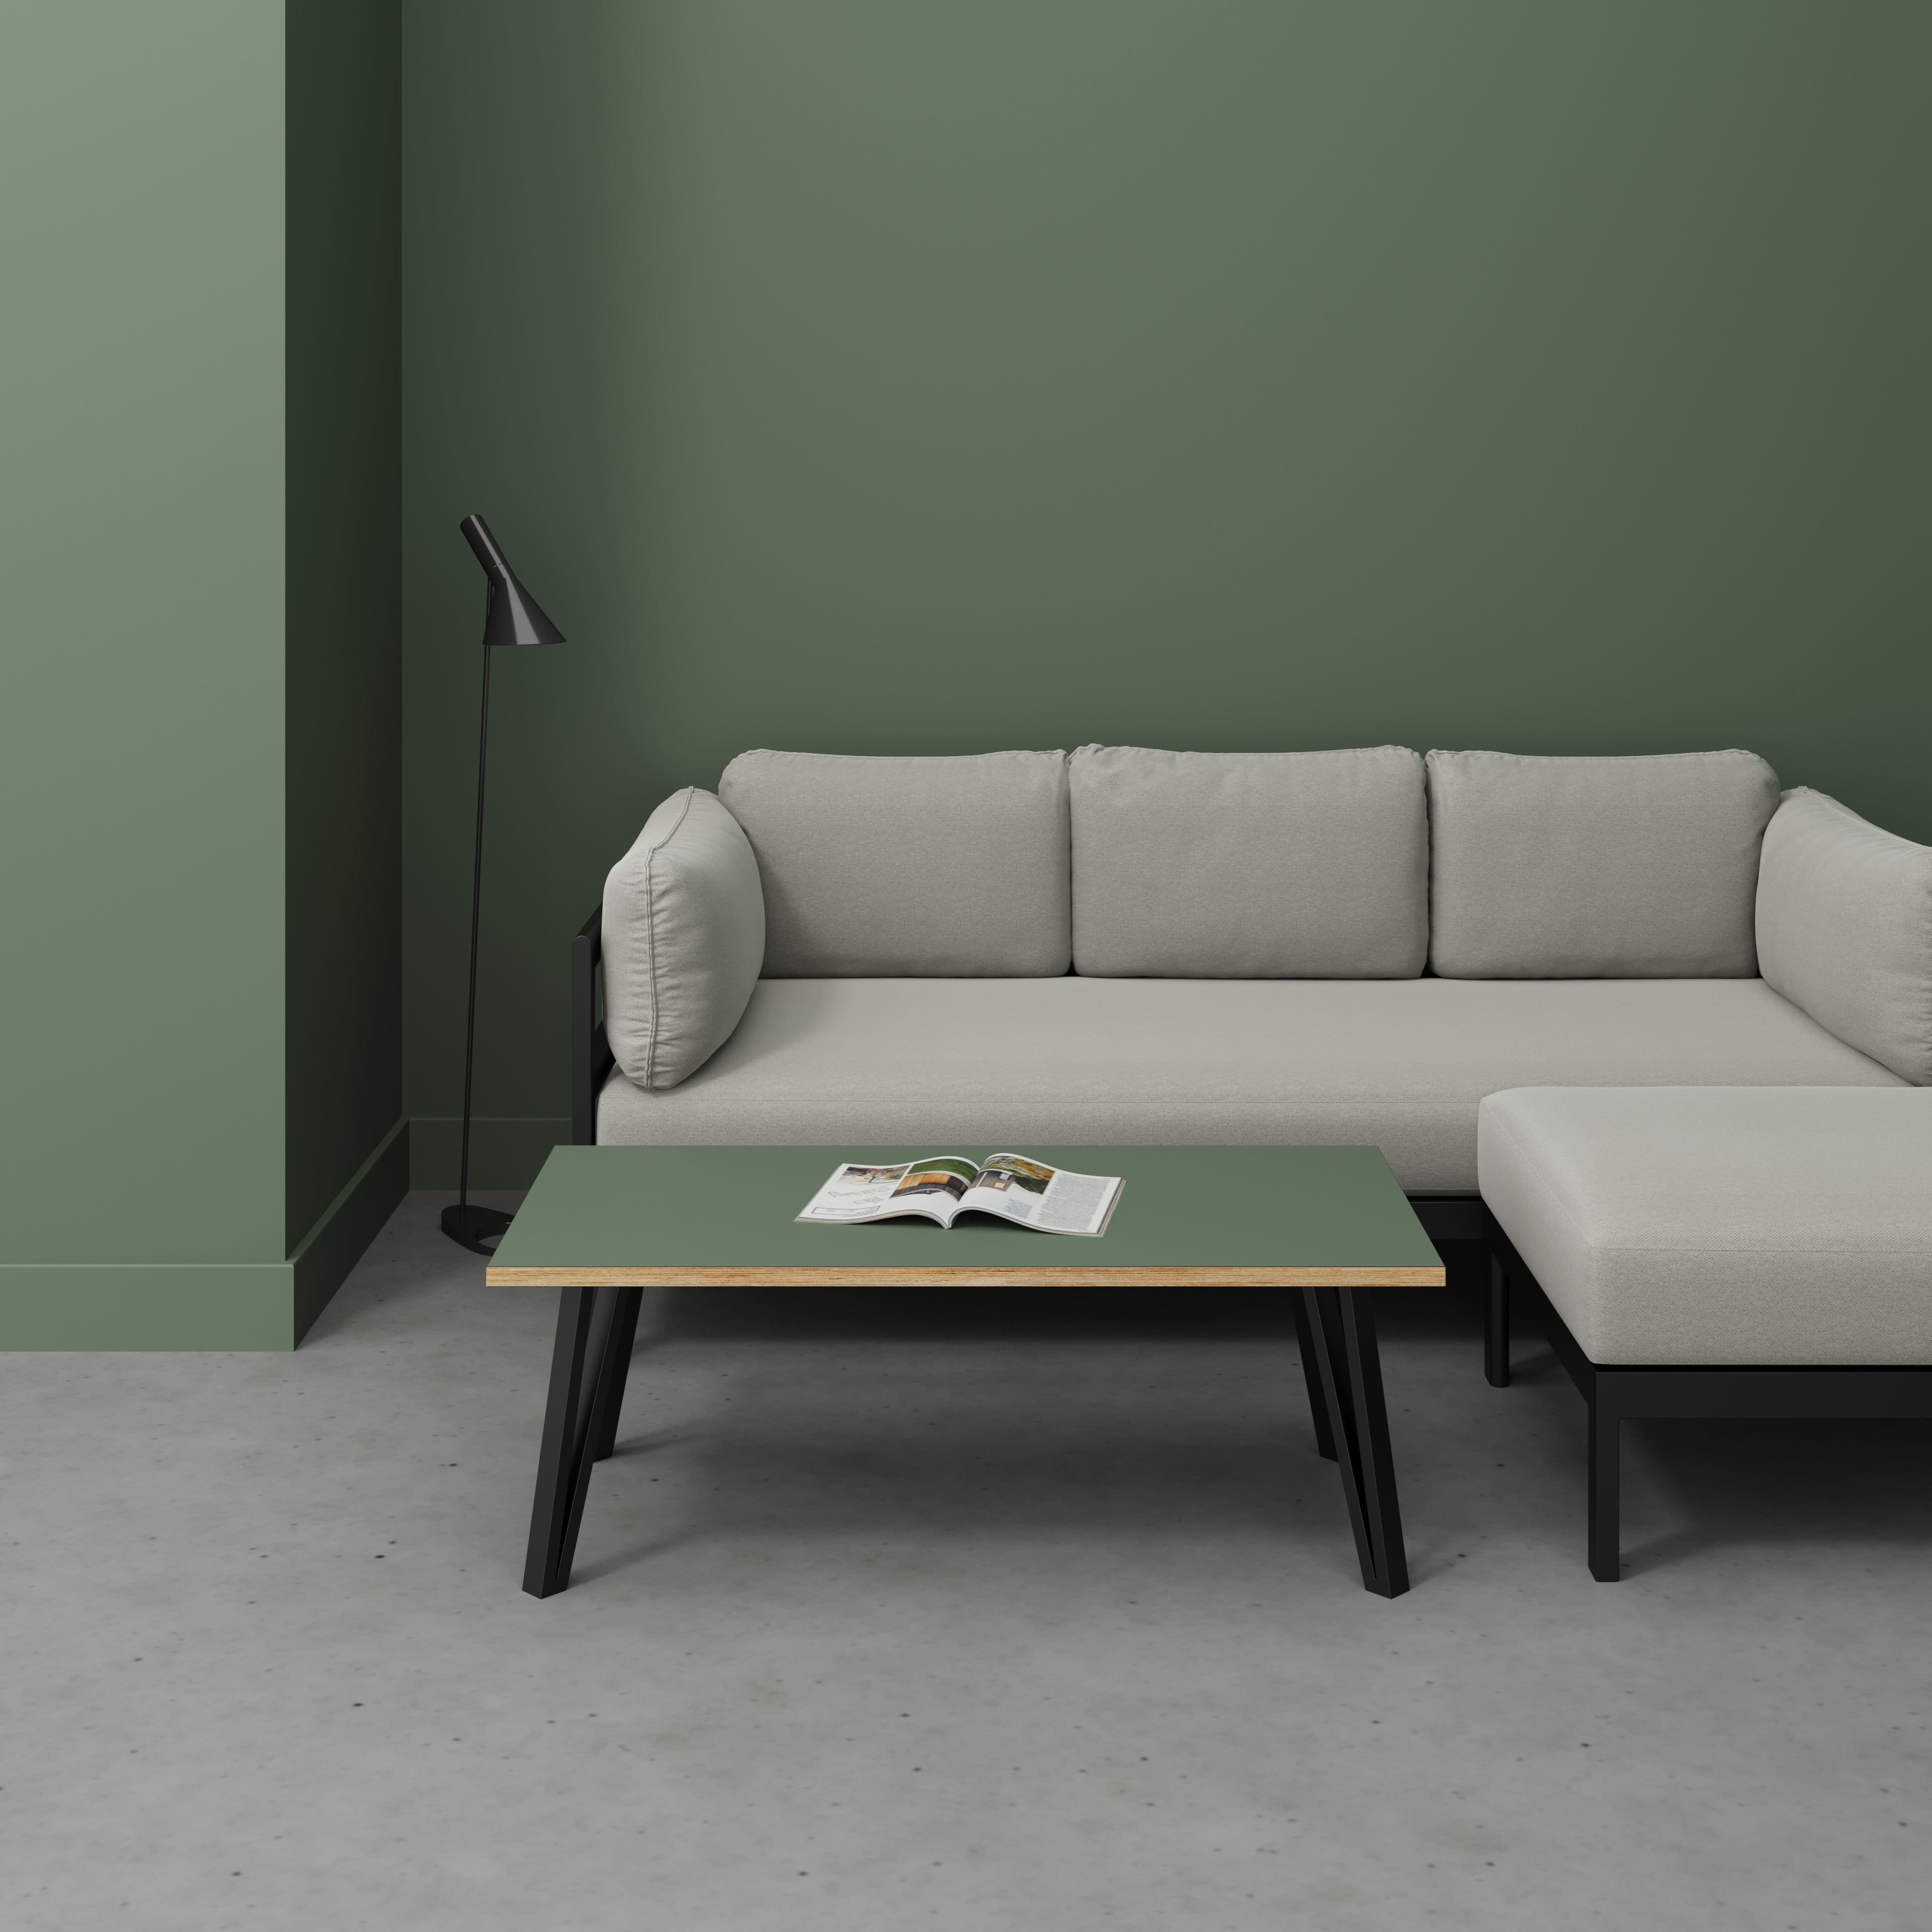 Coffee Table with Black Box Hairpin Legs - Formica Green Slate - 1200(w) x 600(d) x 425(h)